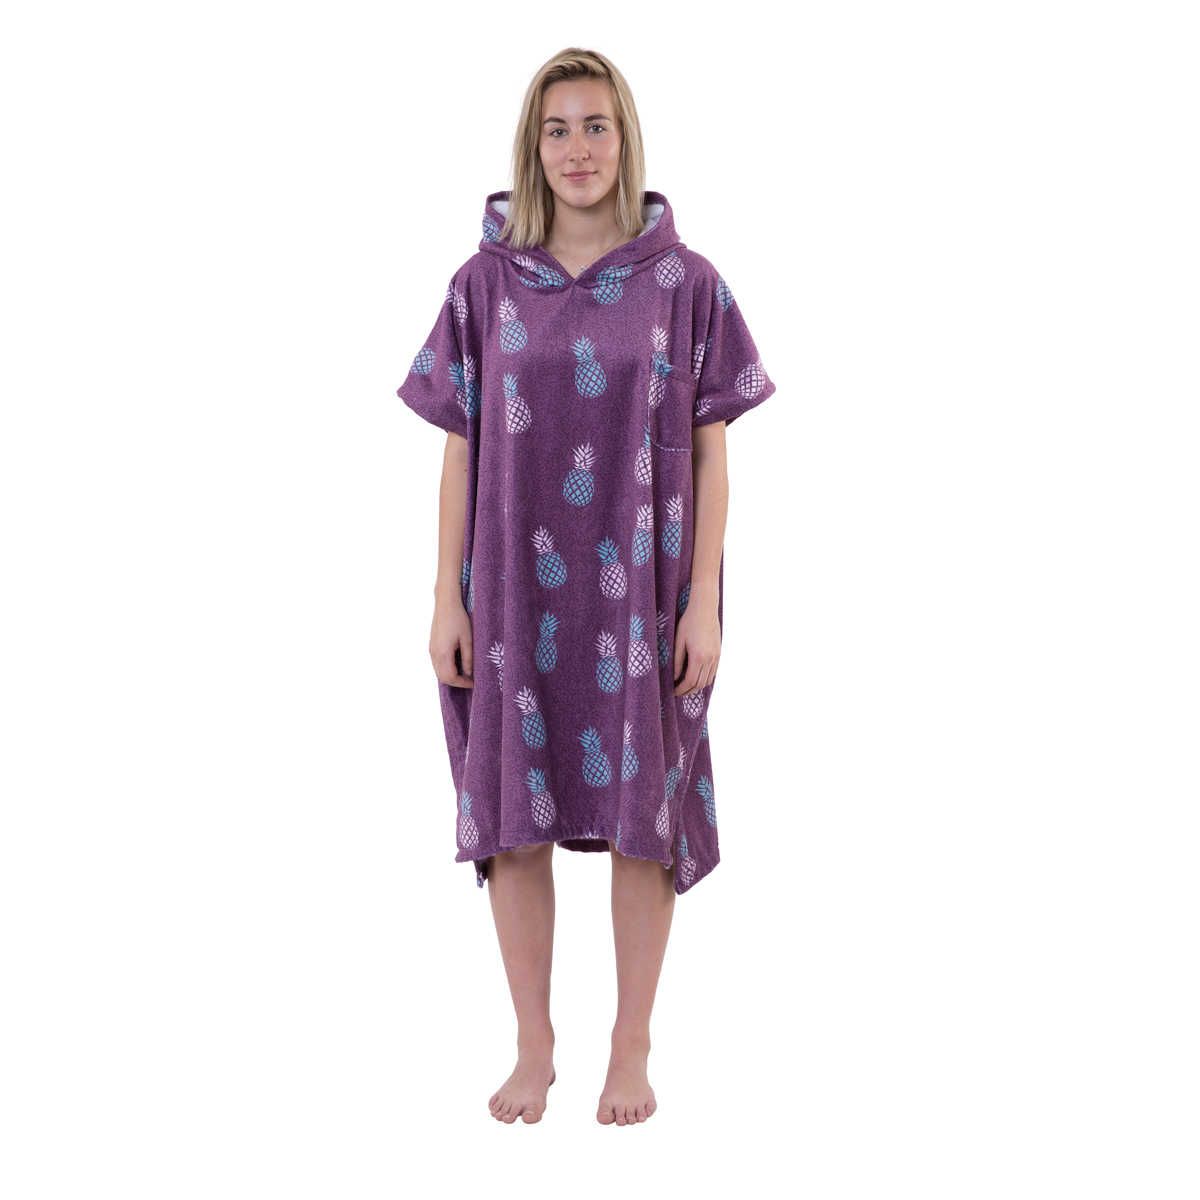 Poncho Pineapple - Violet - After